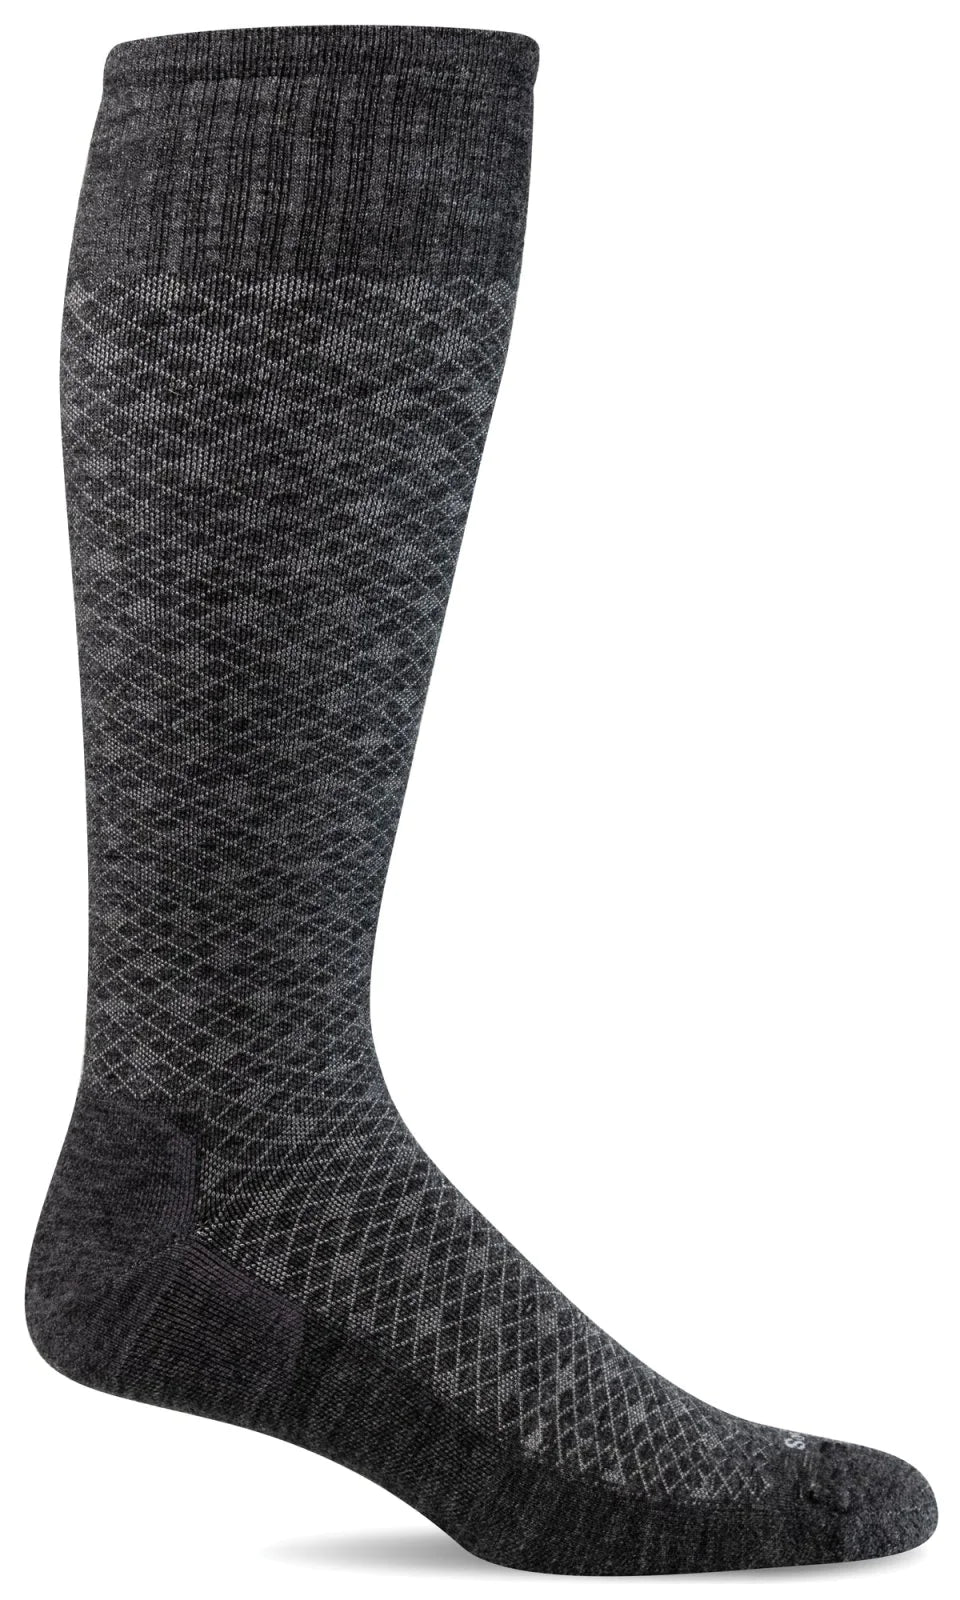 Featherweight | Men's Moderate Compression Knee-High